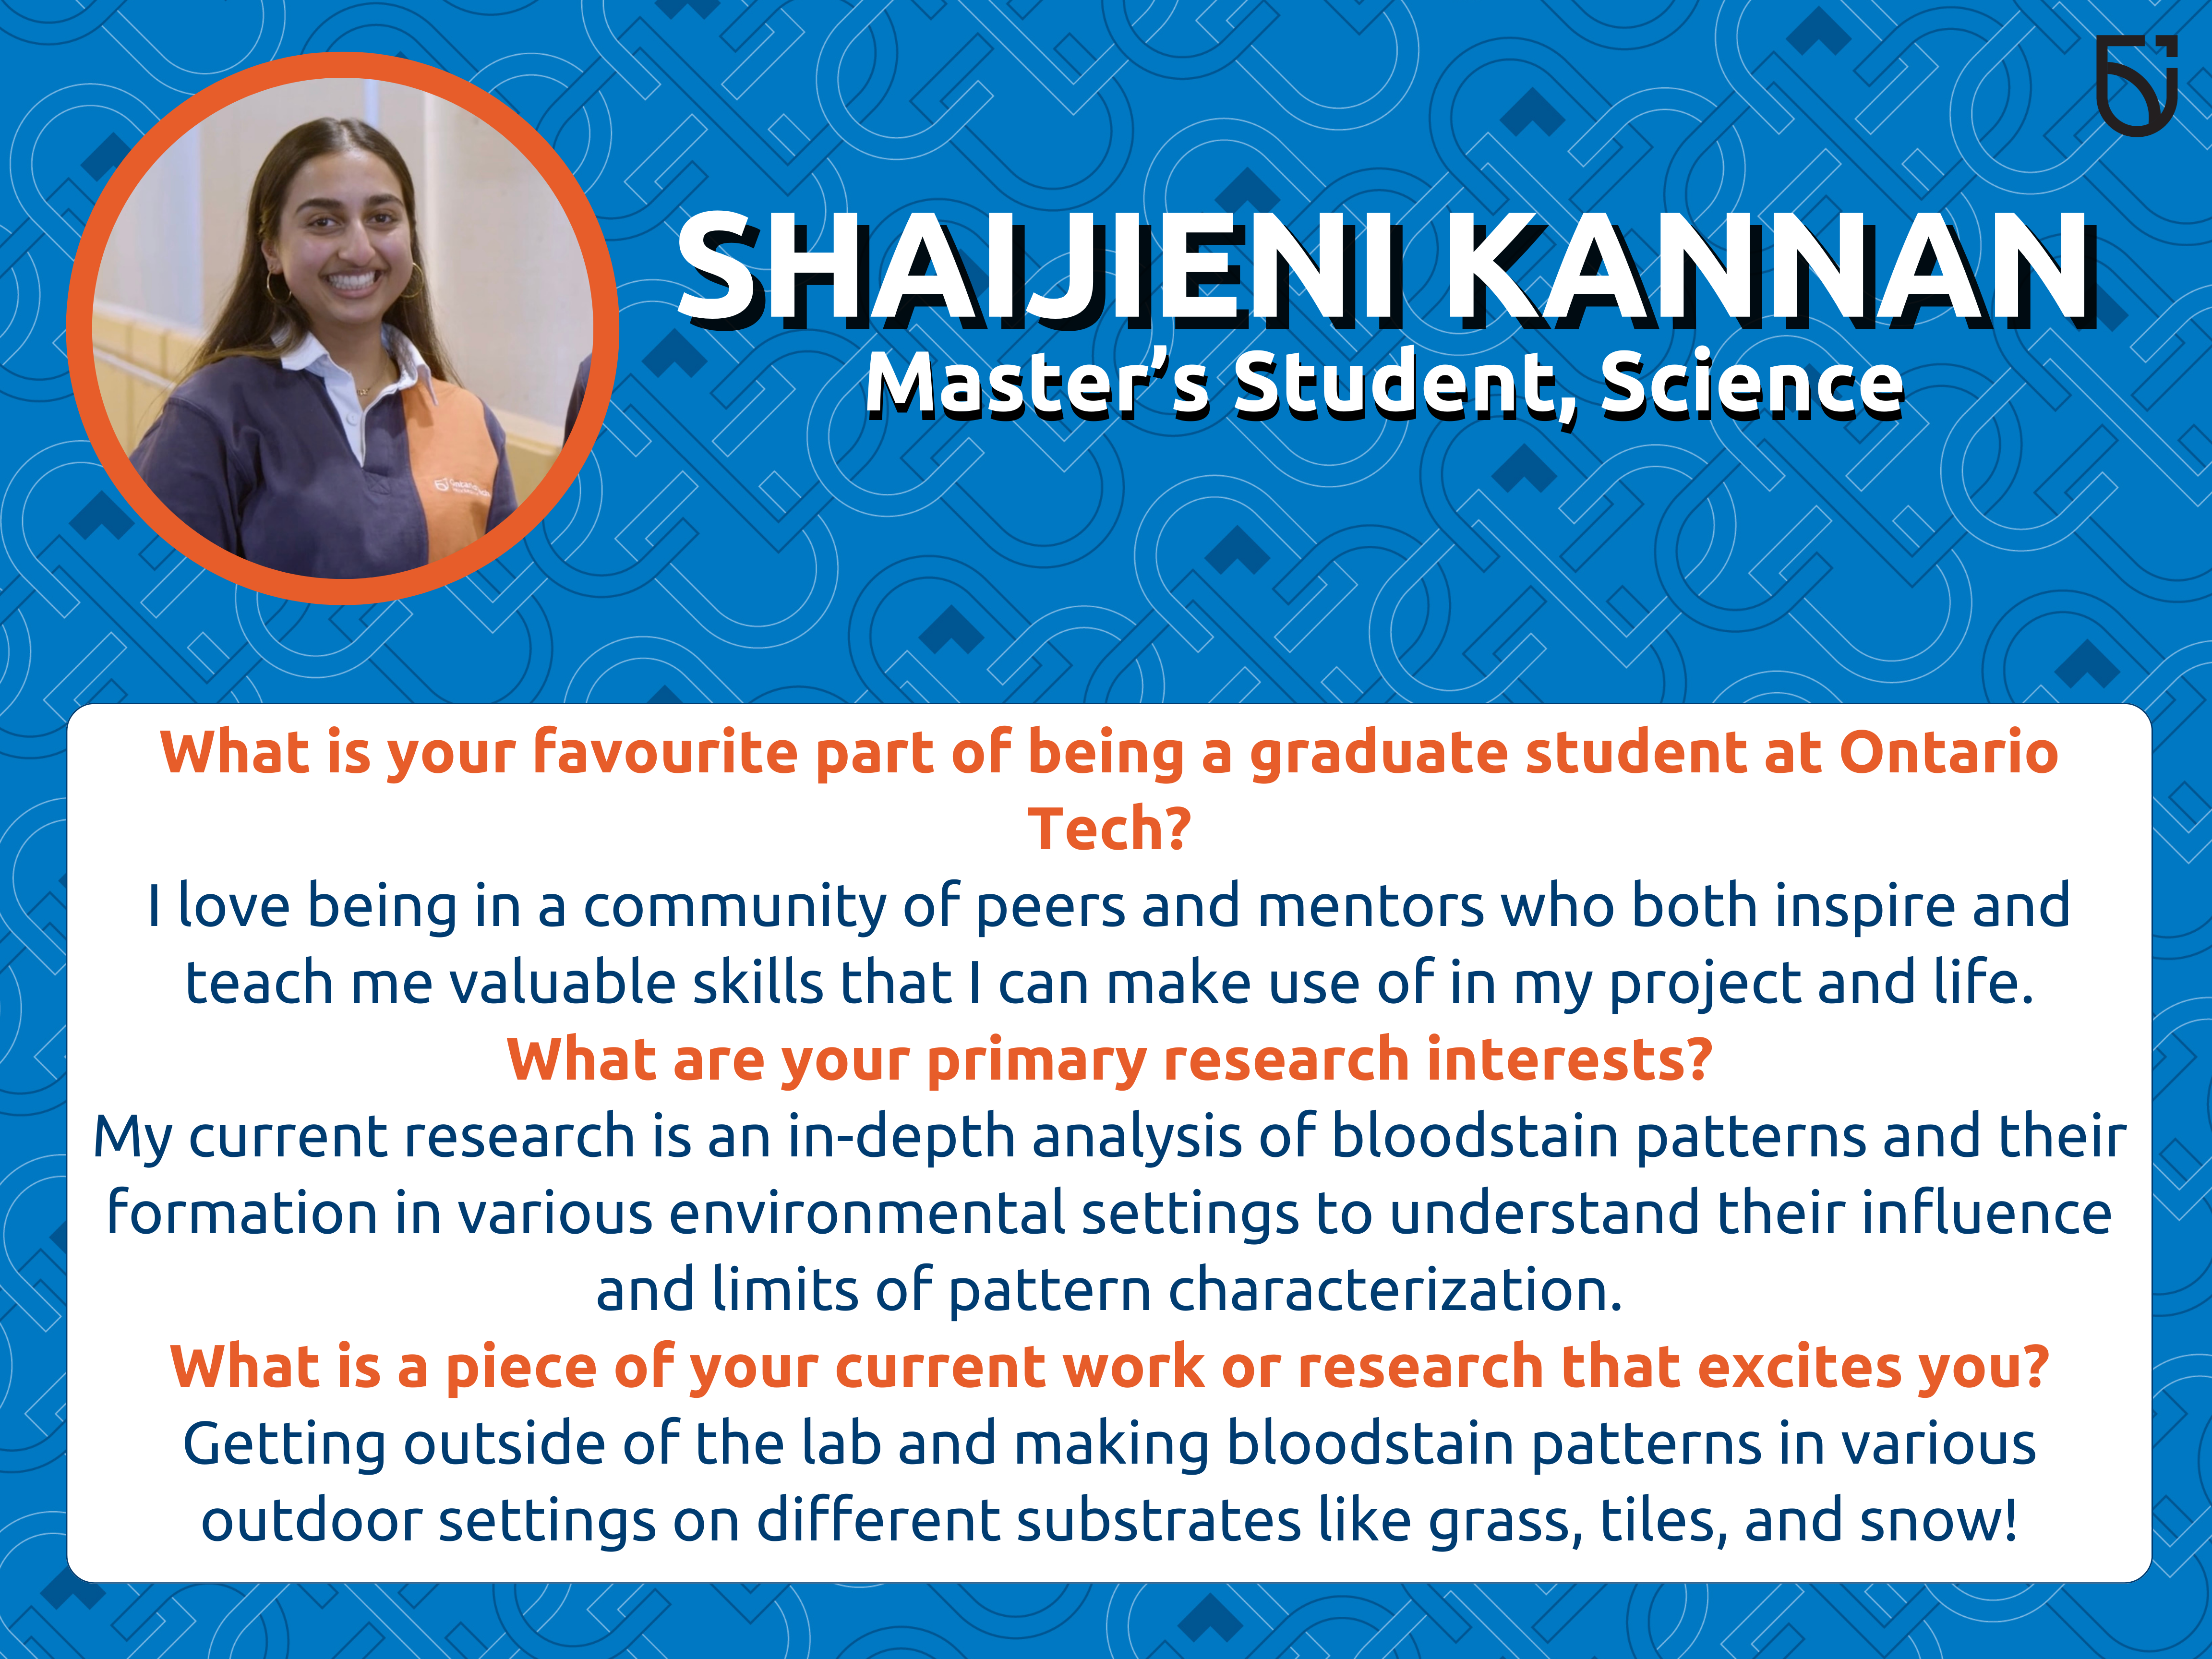 This photo is a Women’s Wednesday feature of Shaijieni Kannan, an MSc student in the Faculty of Science.